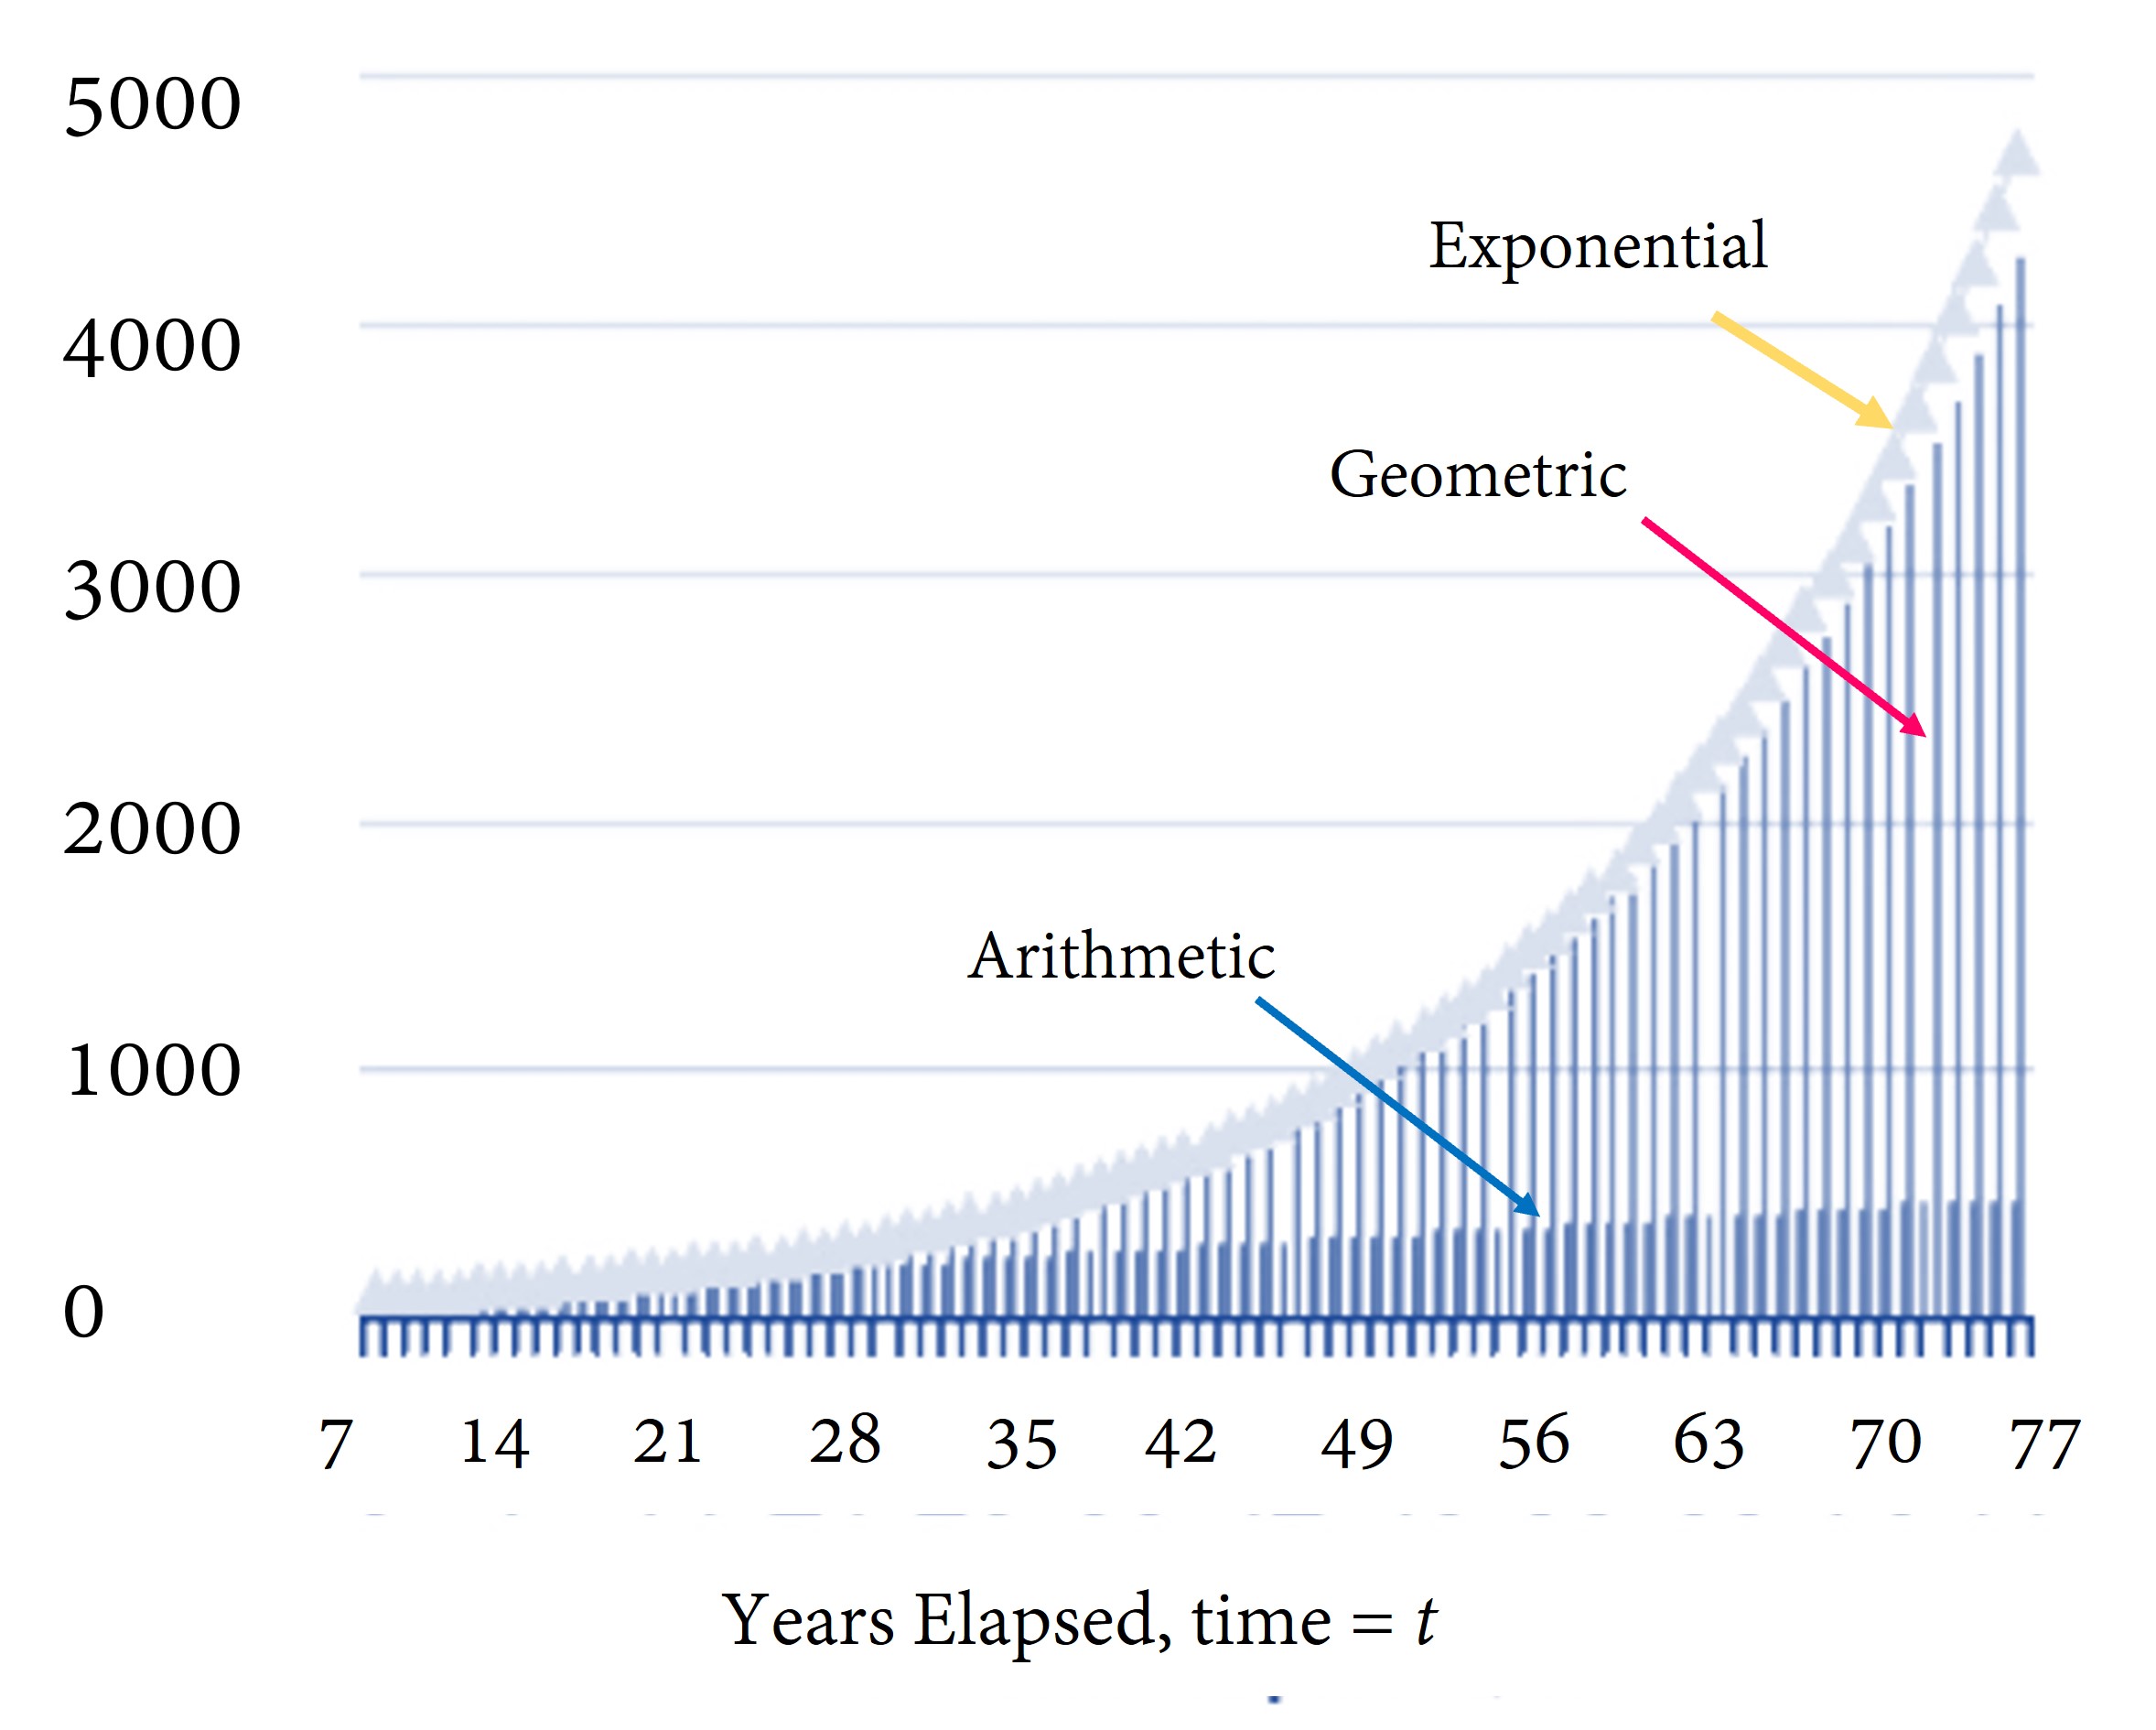 This diagram shows an initial number of people growing over time. Arithmetic growth is linear, while geometric and exponential grow grow more and more each year. The gap between geometric and exponential growth widens as time elapses.